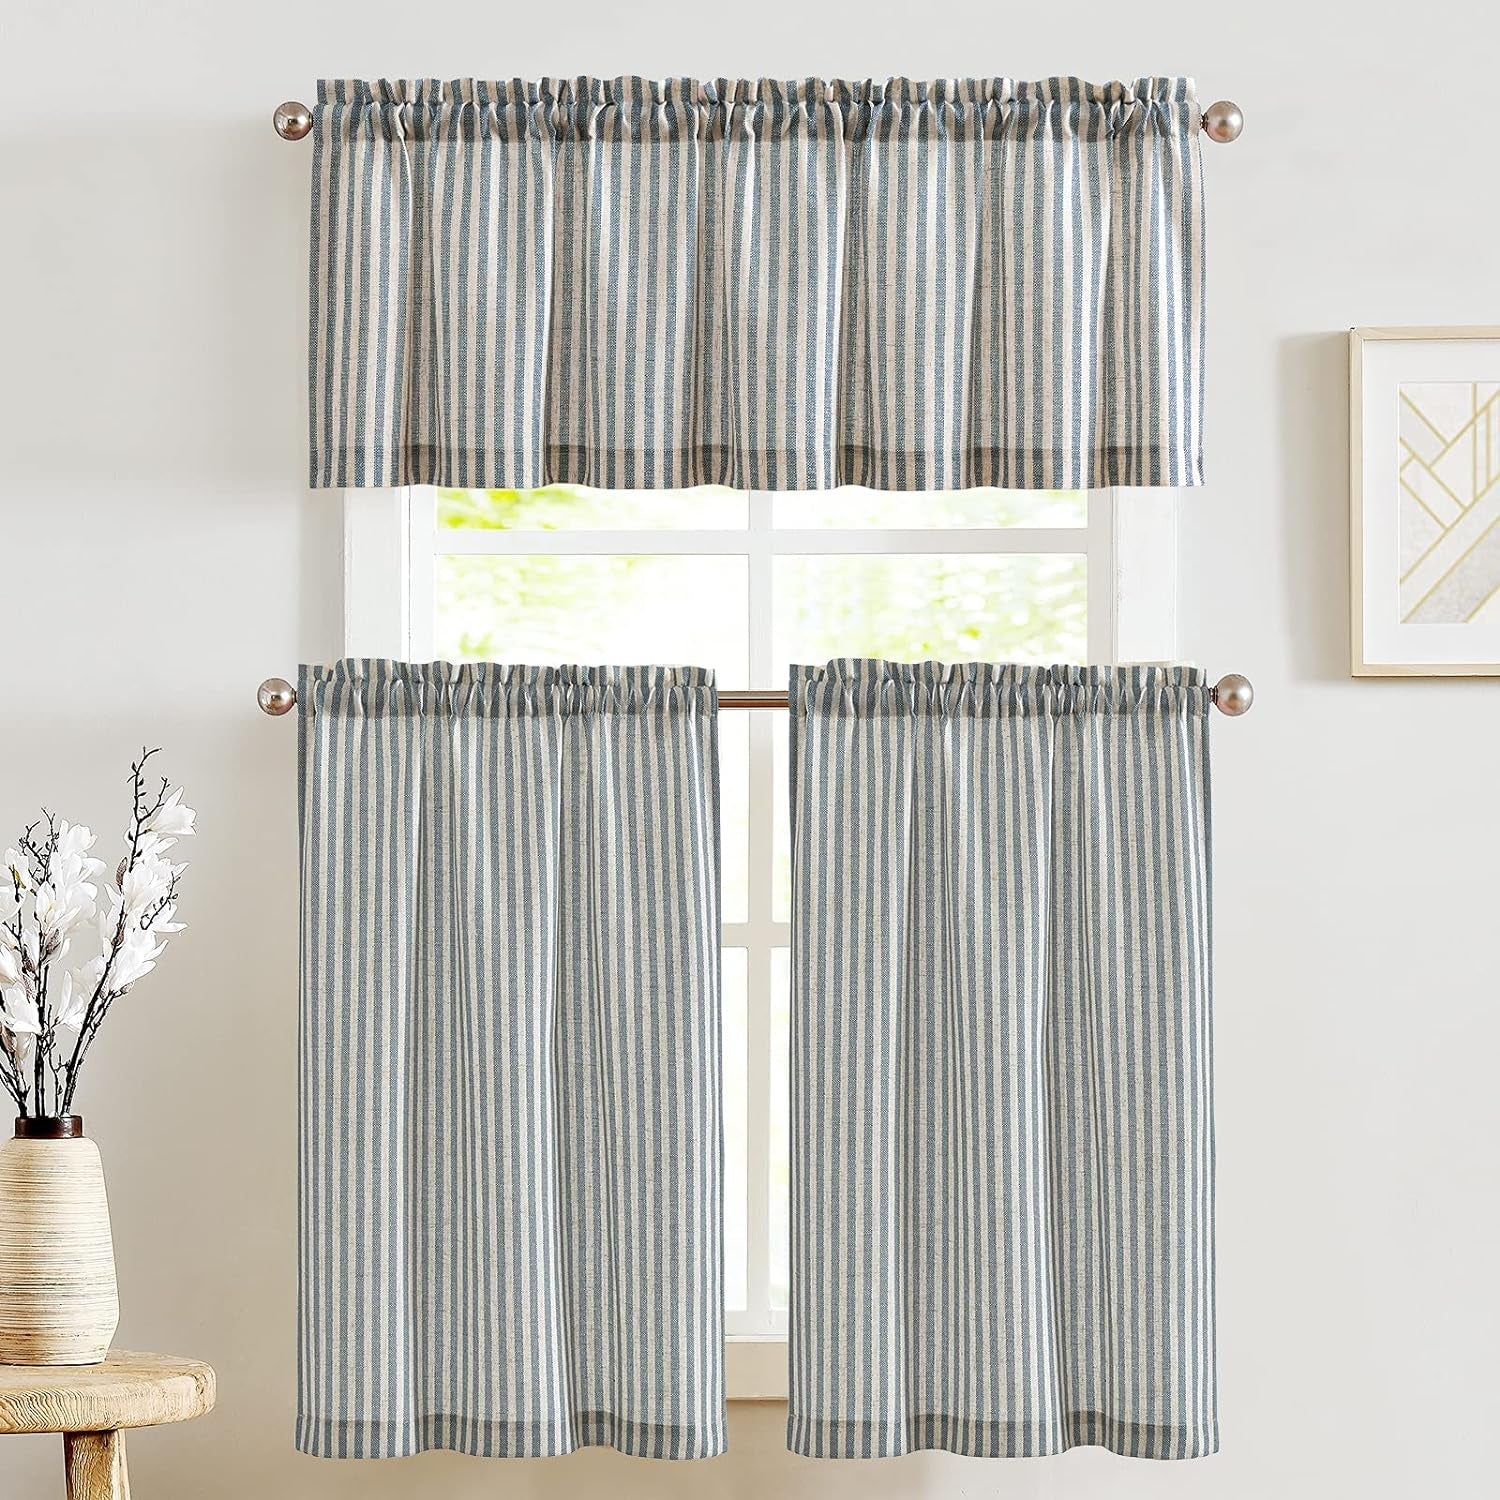 Jinchan Kitchen Curtains and Valances Set Striped Tier Curtains Ticking Stripe Linen Curtains Pinstripe Cafe Curtains 36 Inch for Living Room Bathroom Farmhouse 3 Pieces Set Rod Pocket Taupe on Beige